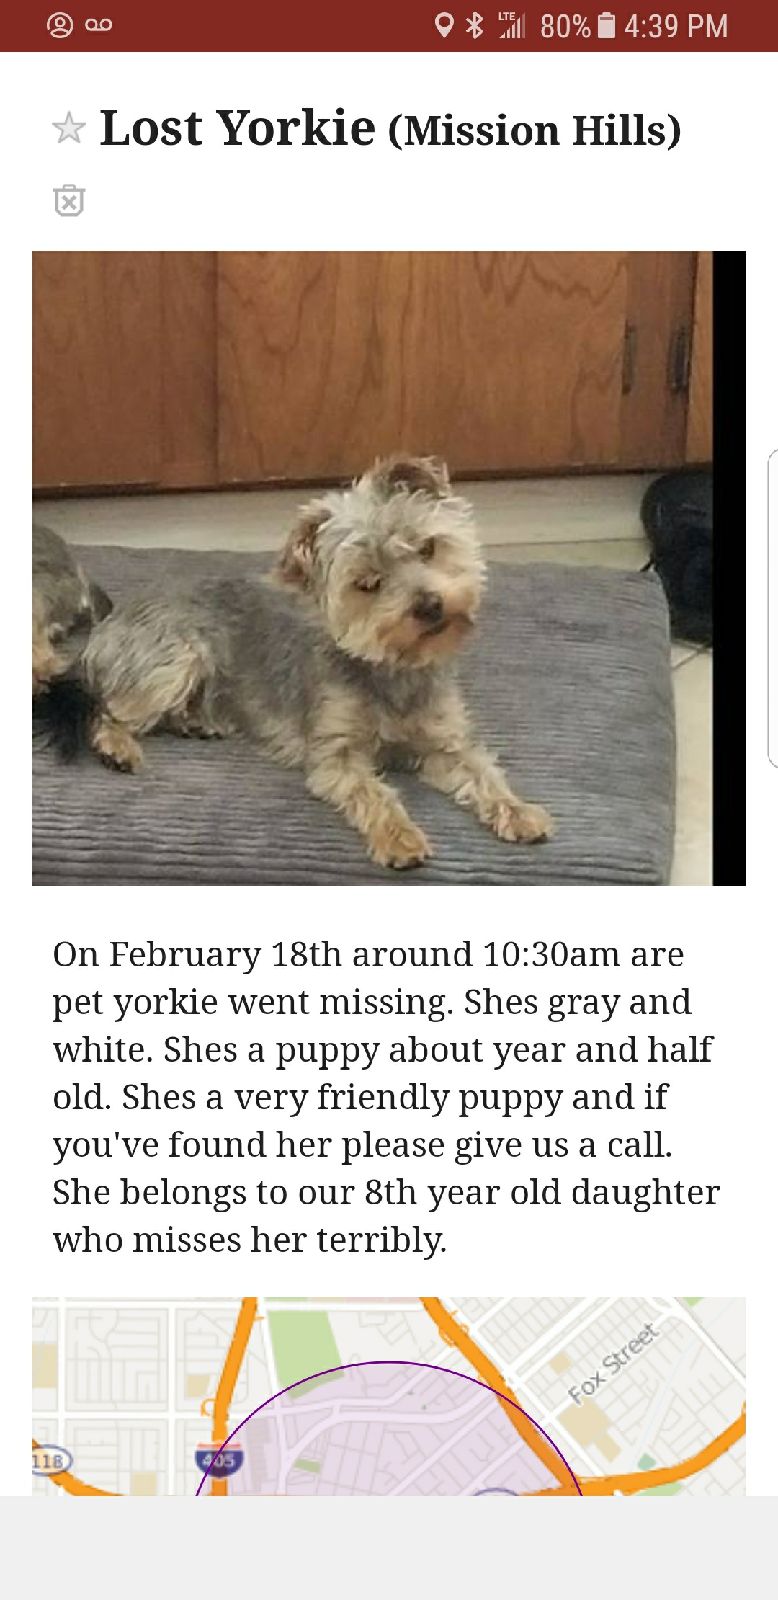 Image of Pepper, Lost Dog